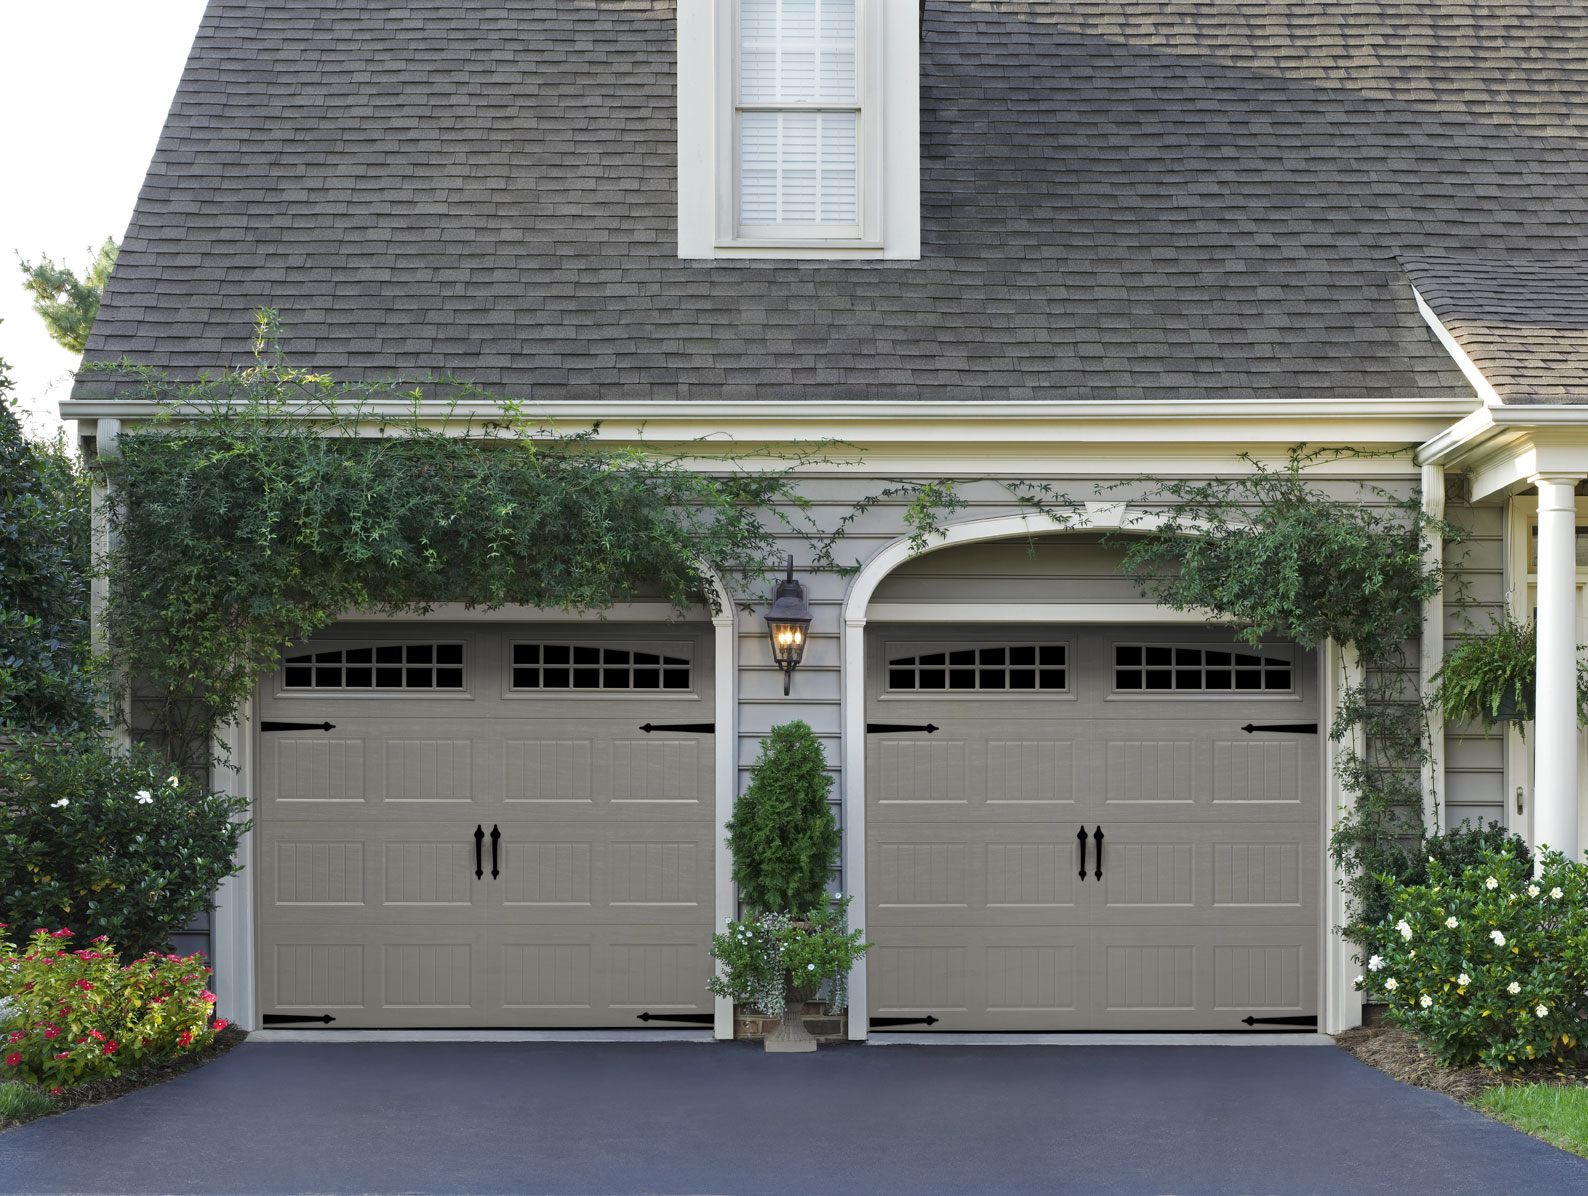 Modern Garage Door Companies Vancouver for Large Space